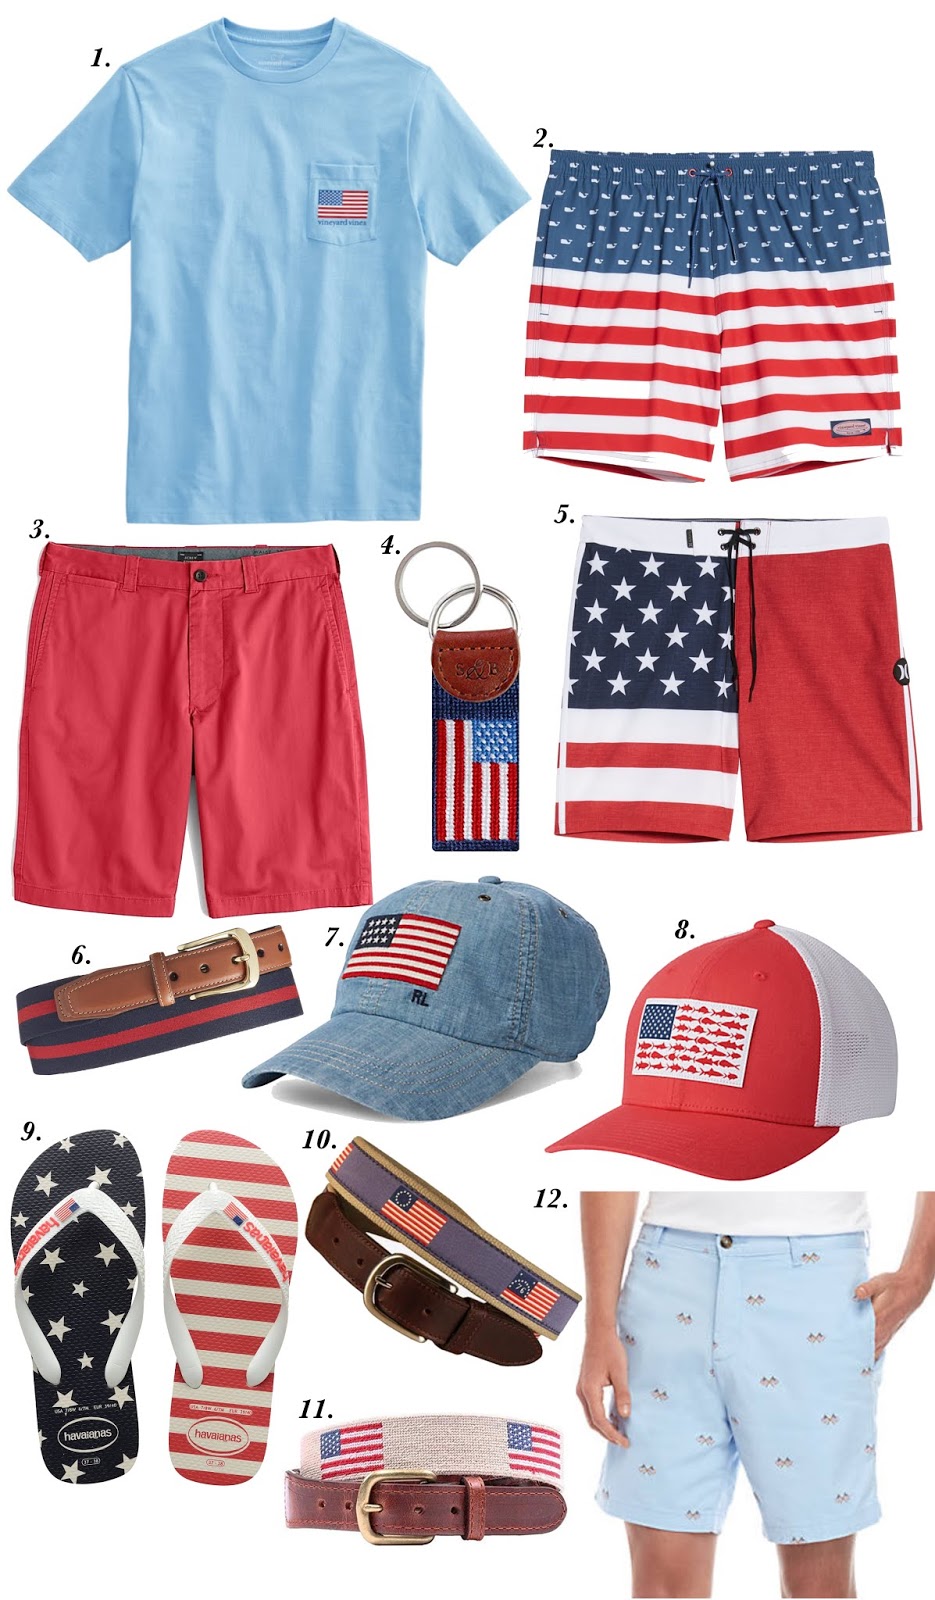 July 4th Outfit Inspiration for the whole family - Something Delightful Blog #summerstyle #patriotic